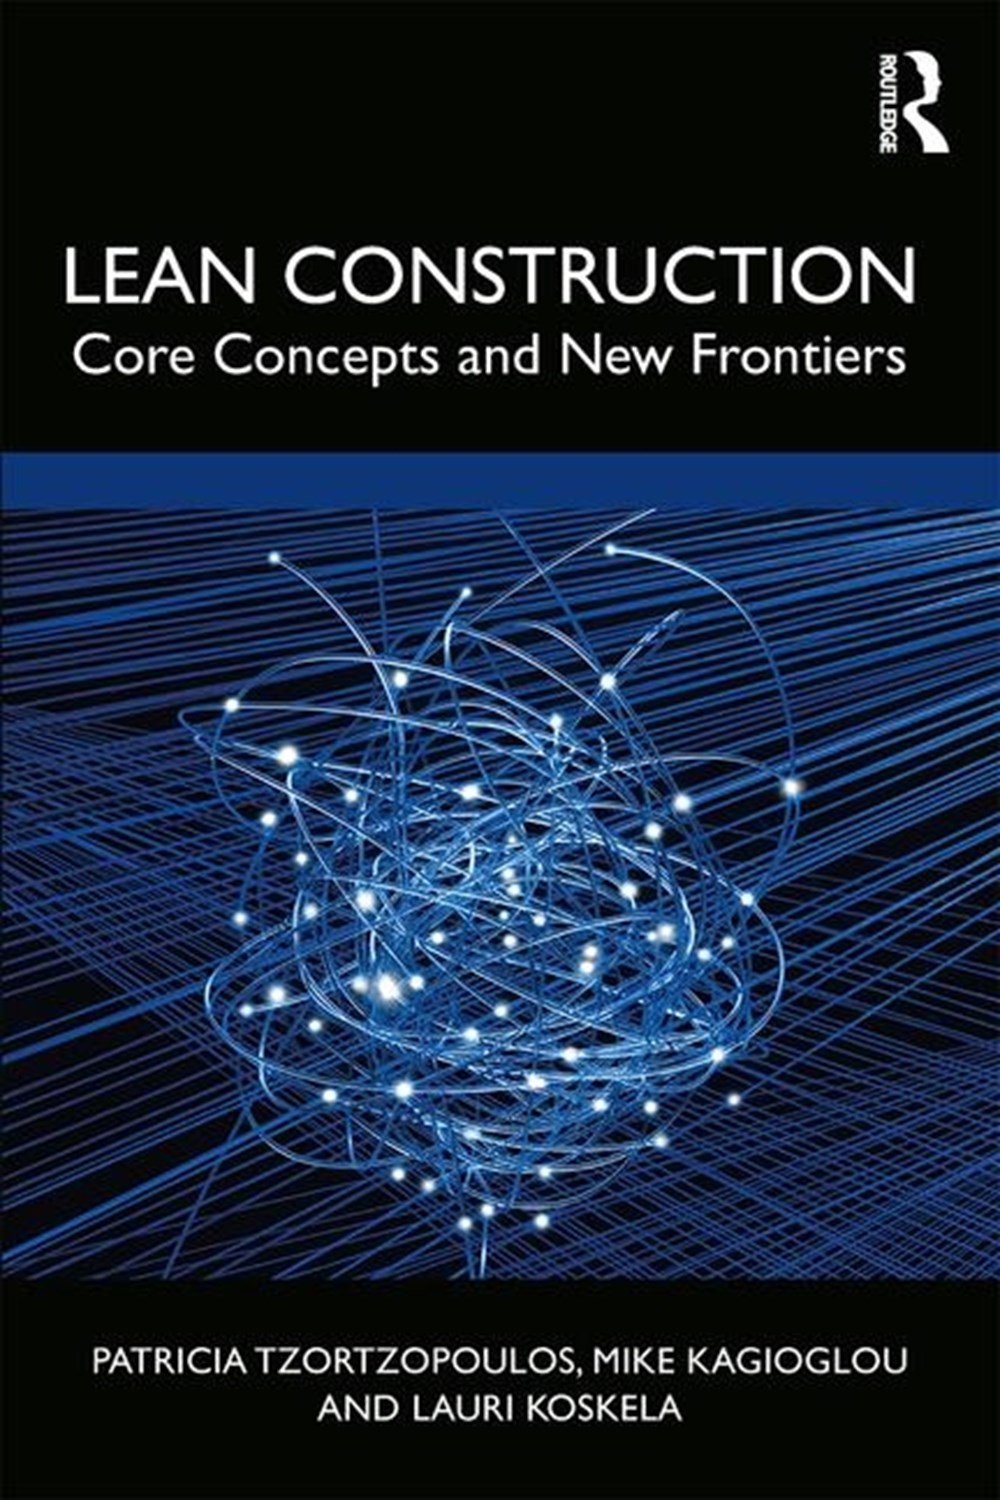 Lean Construction: Core Concepts and New Frontiers